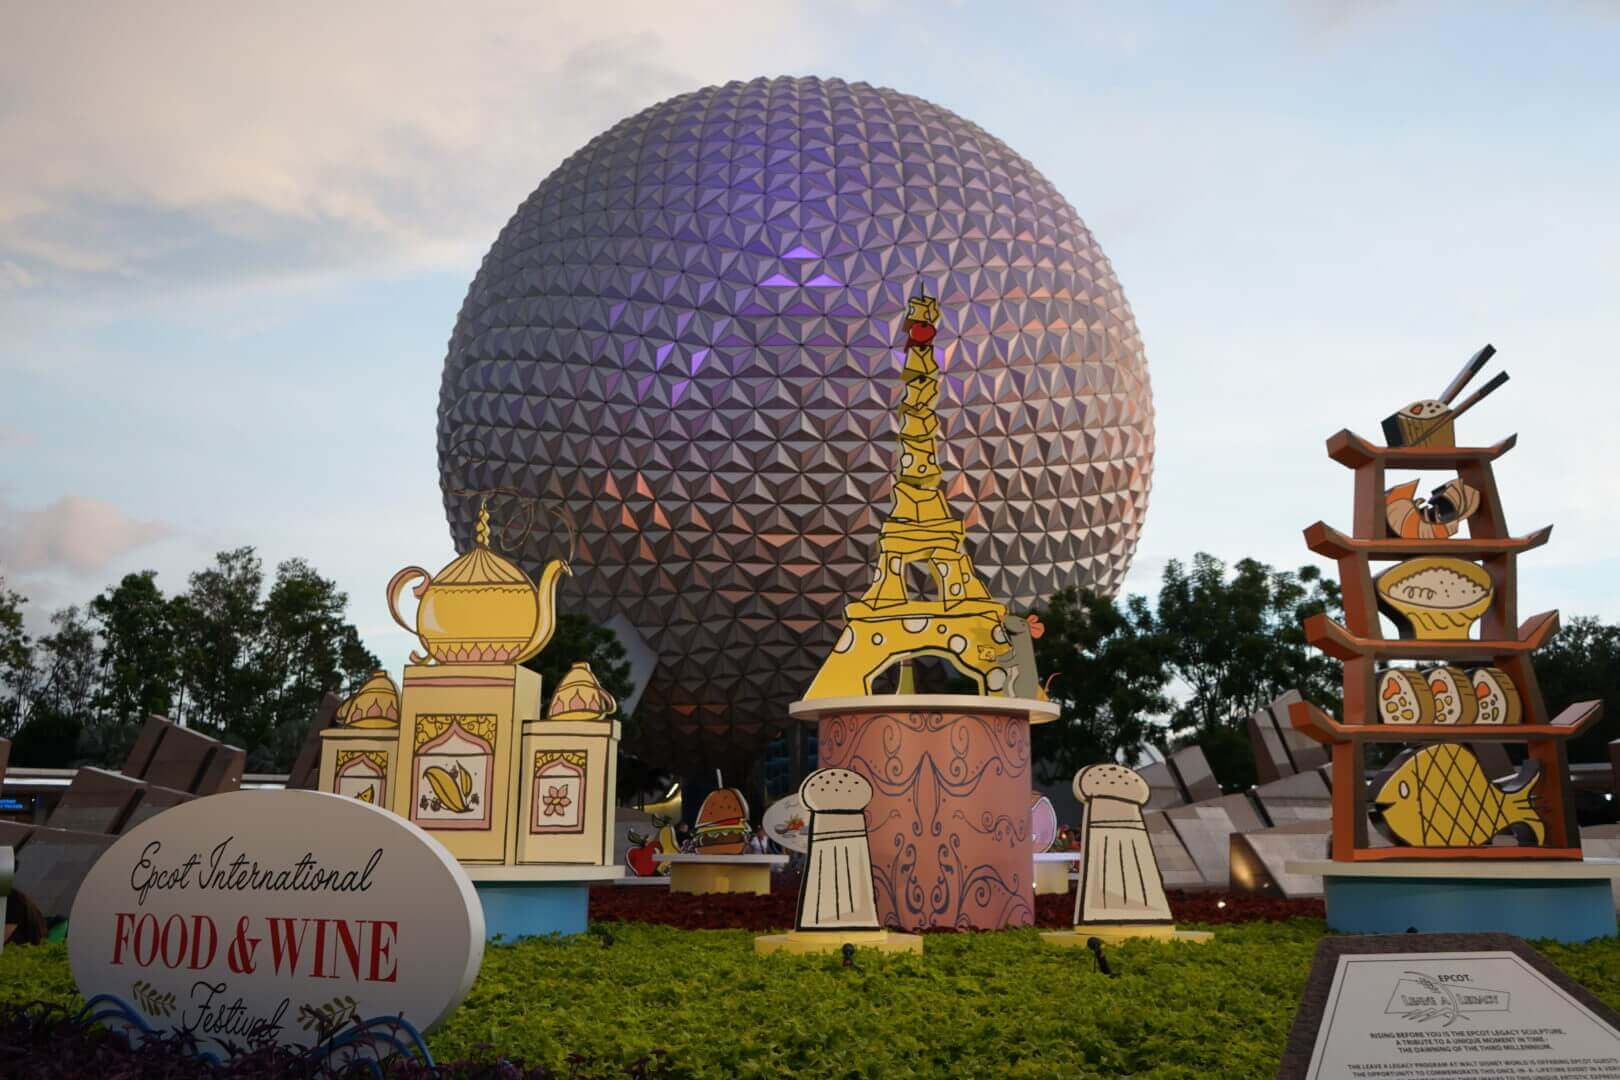 8 Tips to Get the Most out of Epcot’s Food & Wine Festival